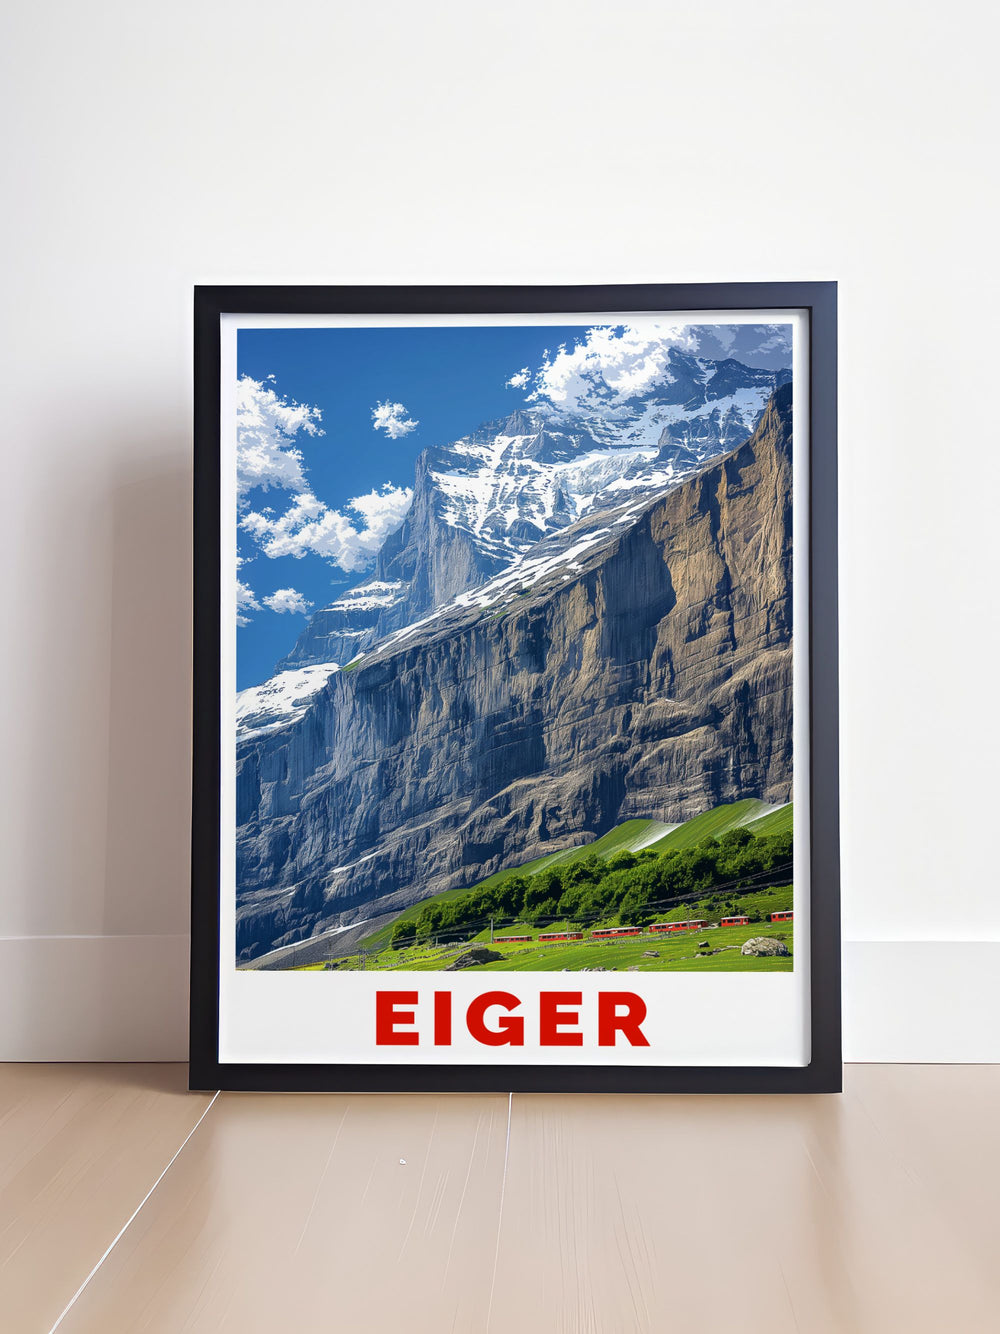 Captivating Lauterbrunnen poster featuring the picturesque waterfalls and lush green valley with the iconic Eiger mountain in the background perfect for nature lovers and anyone who appreciates the serene beauty of the Swiss Alps in their home decor.